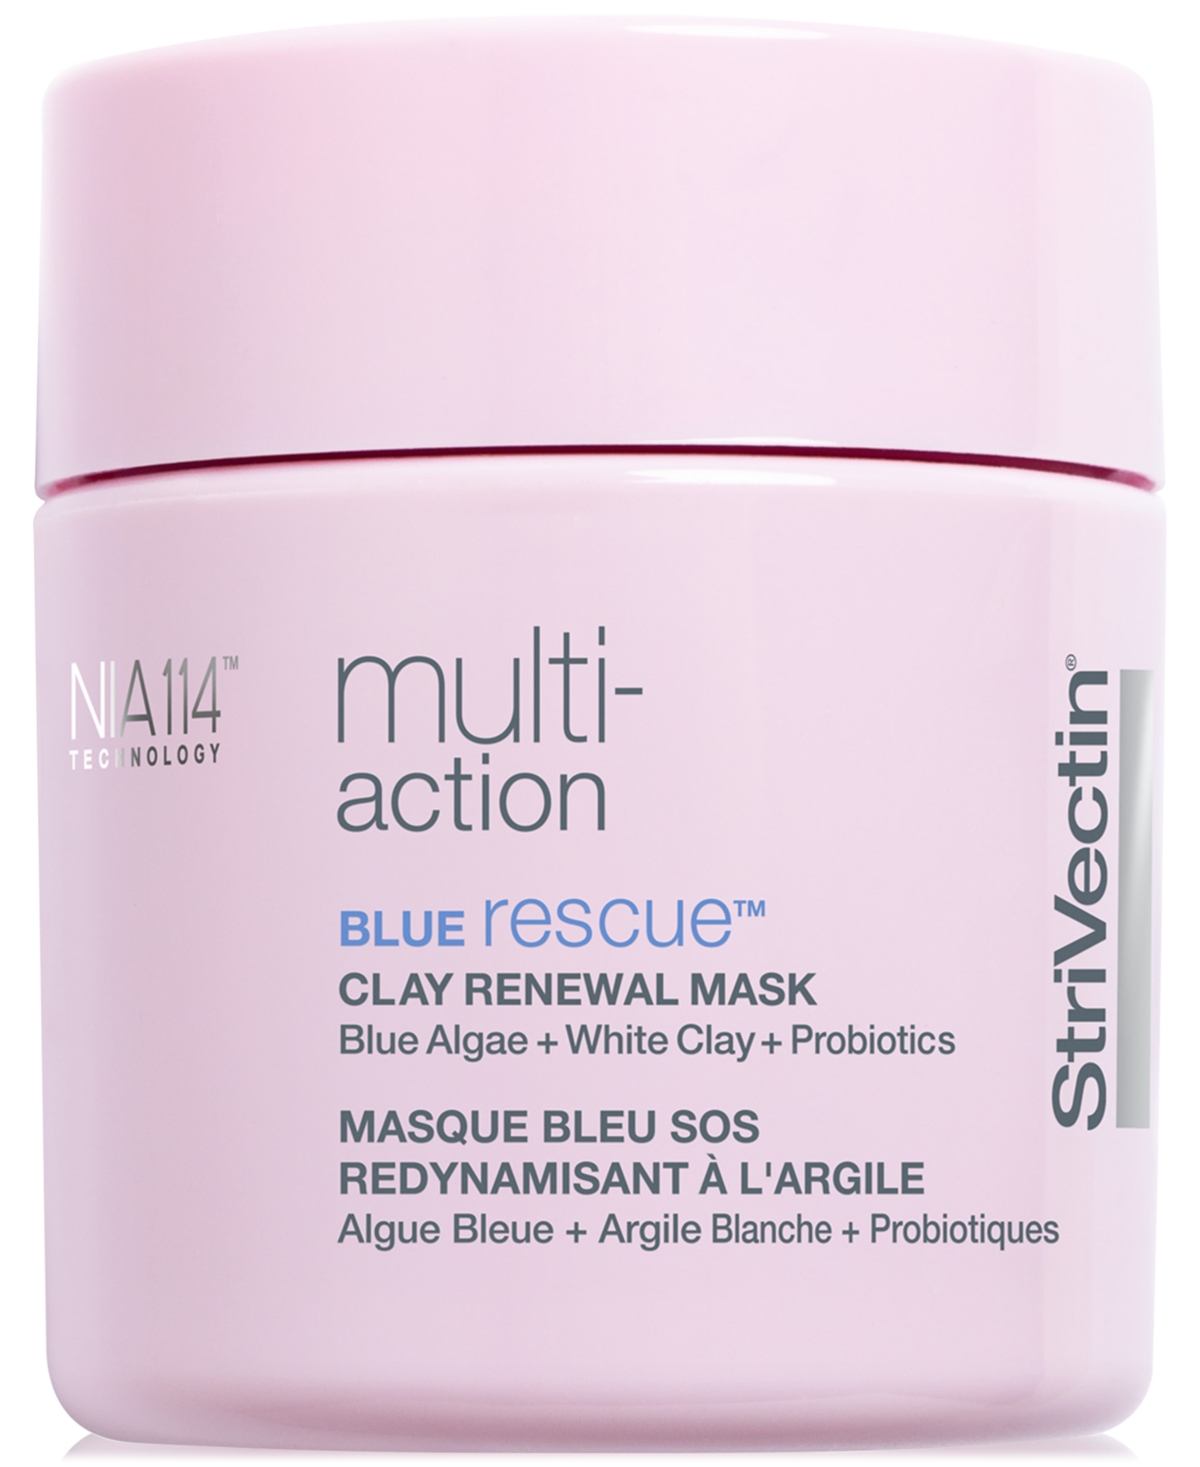 Multi-Action Blue Rescue Clay Renewal Mask, 3.2 oz.